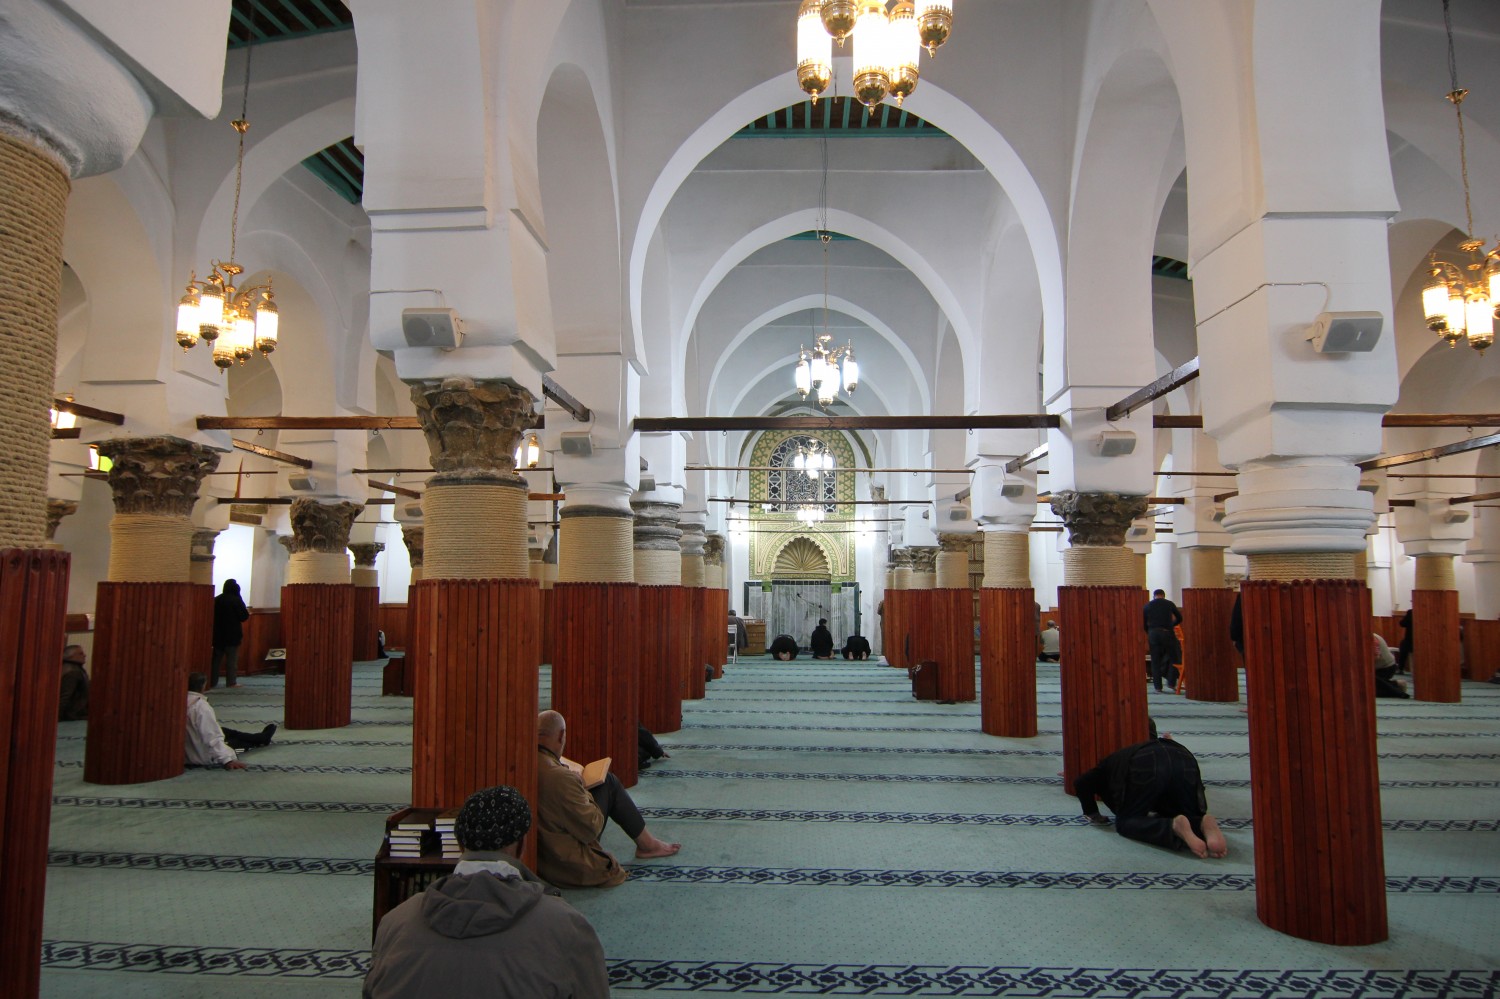 View of the mihrab nave in the prayer hall